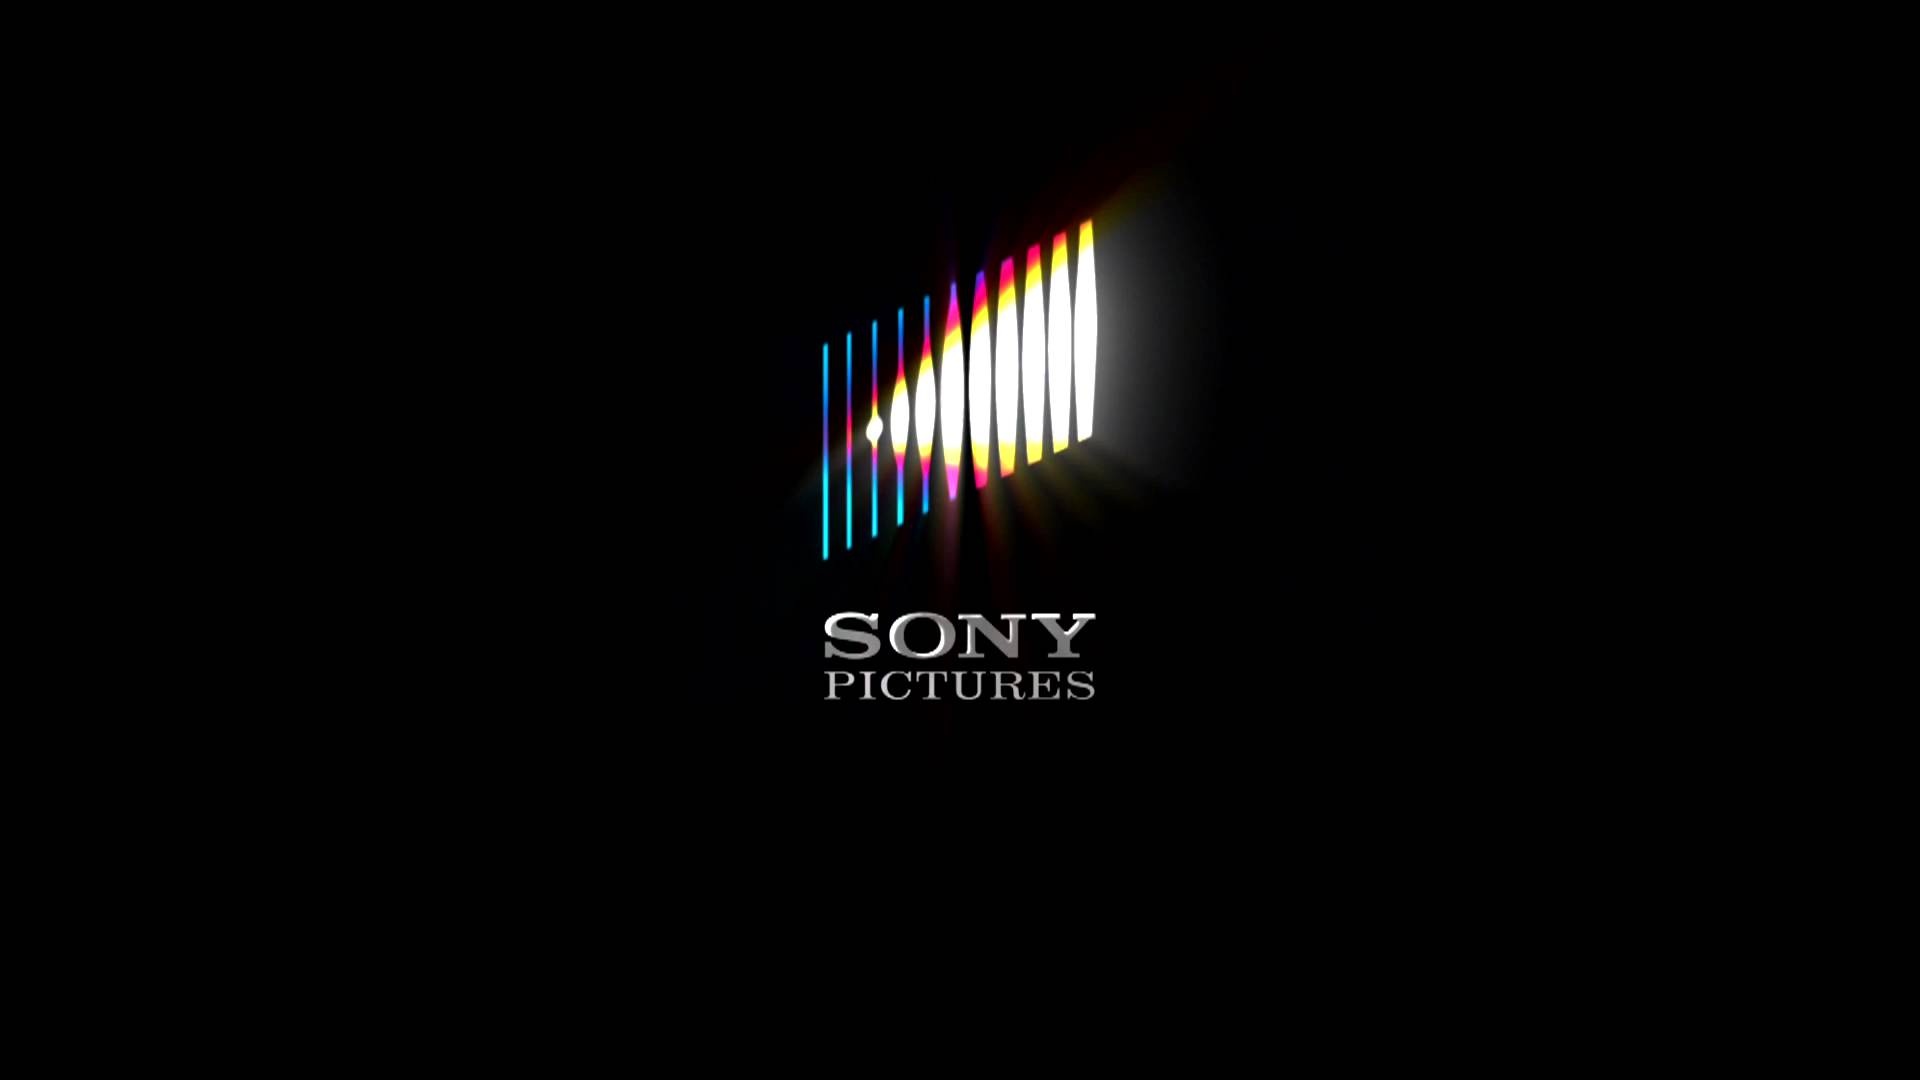 Sony, Pictures logos, Visual branding, Recognition, 1920x1080 Full HD Desktop